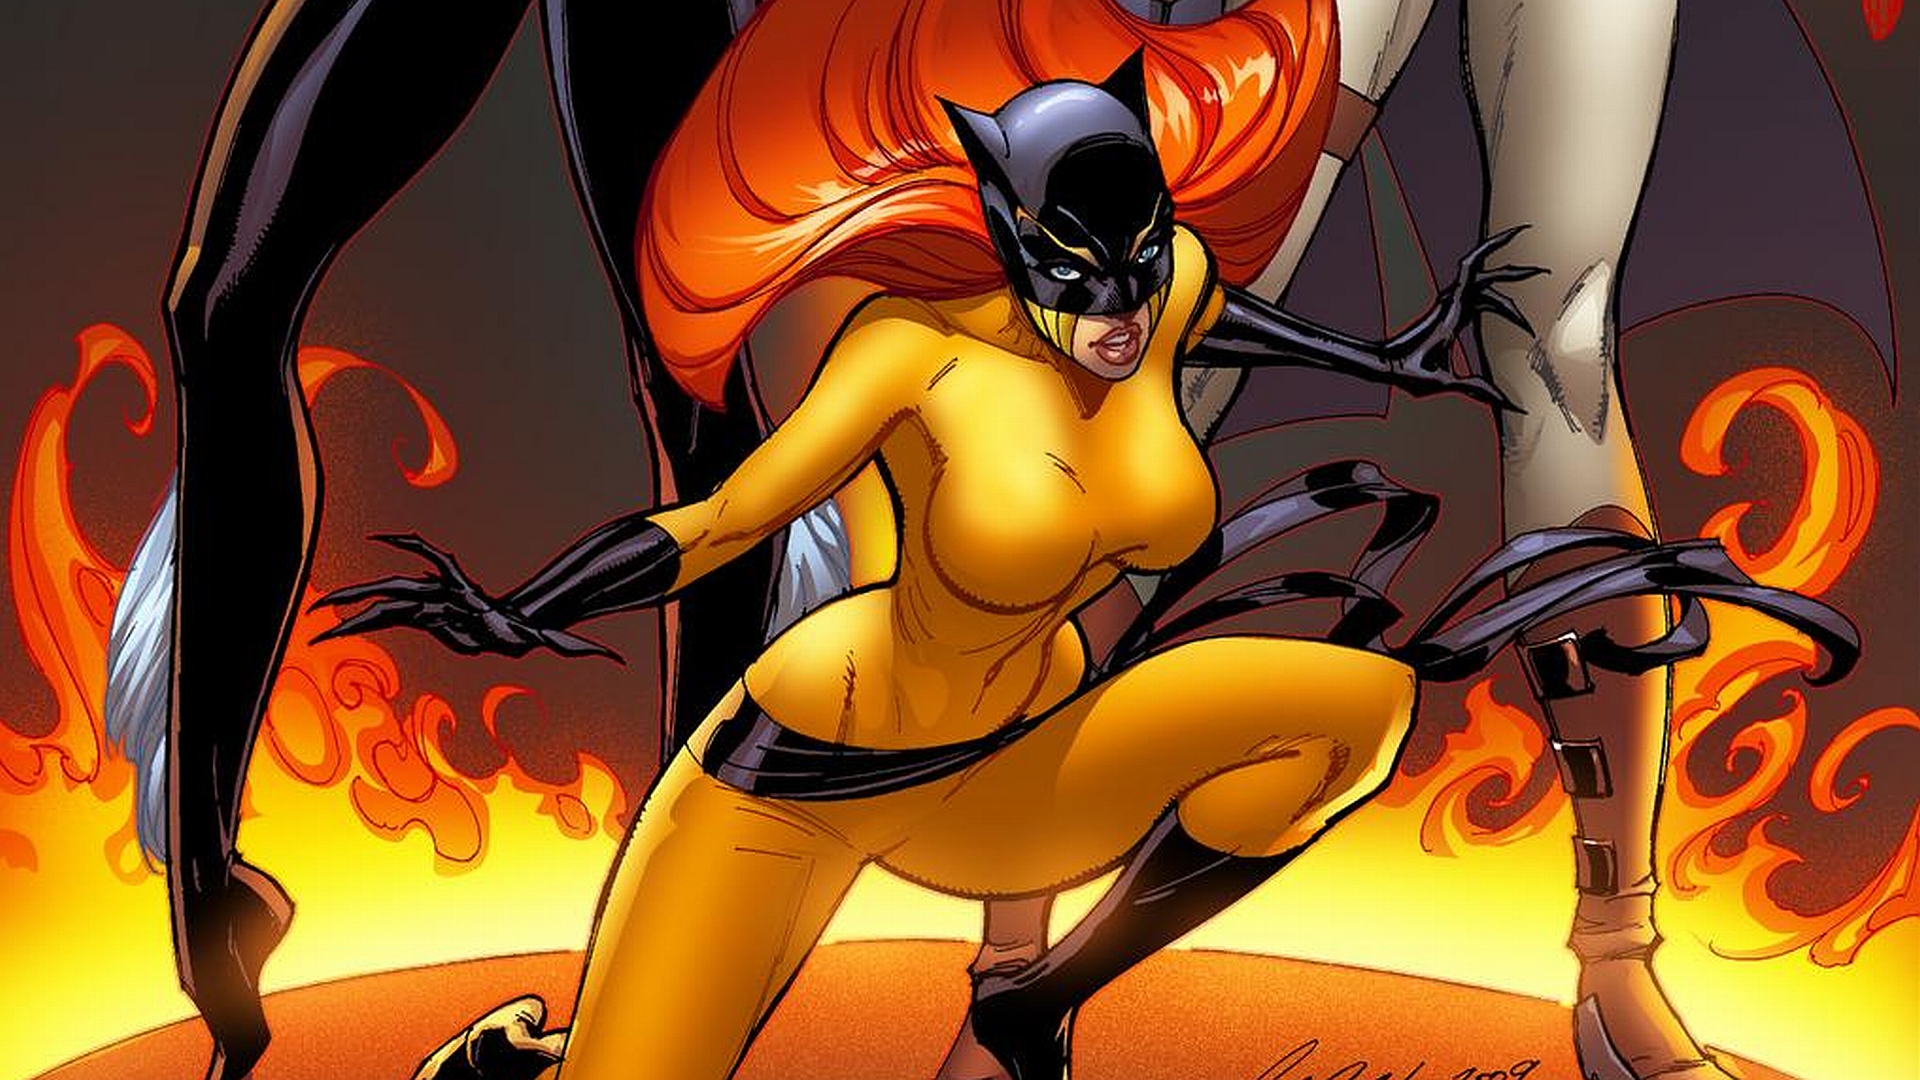 Mysterious superheroine from Marvel Comics, The Cat (Hellcat), featured in a captivating desktop wallpaper.